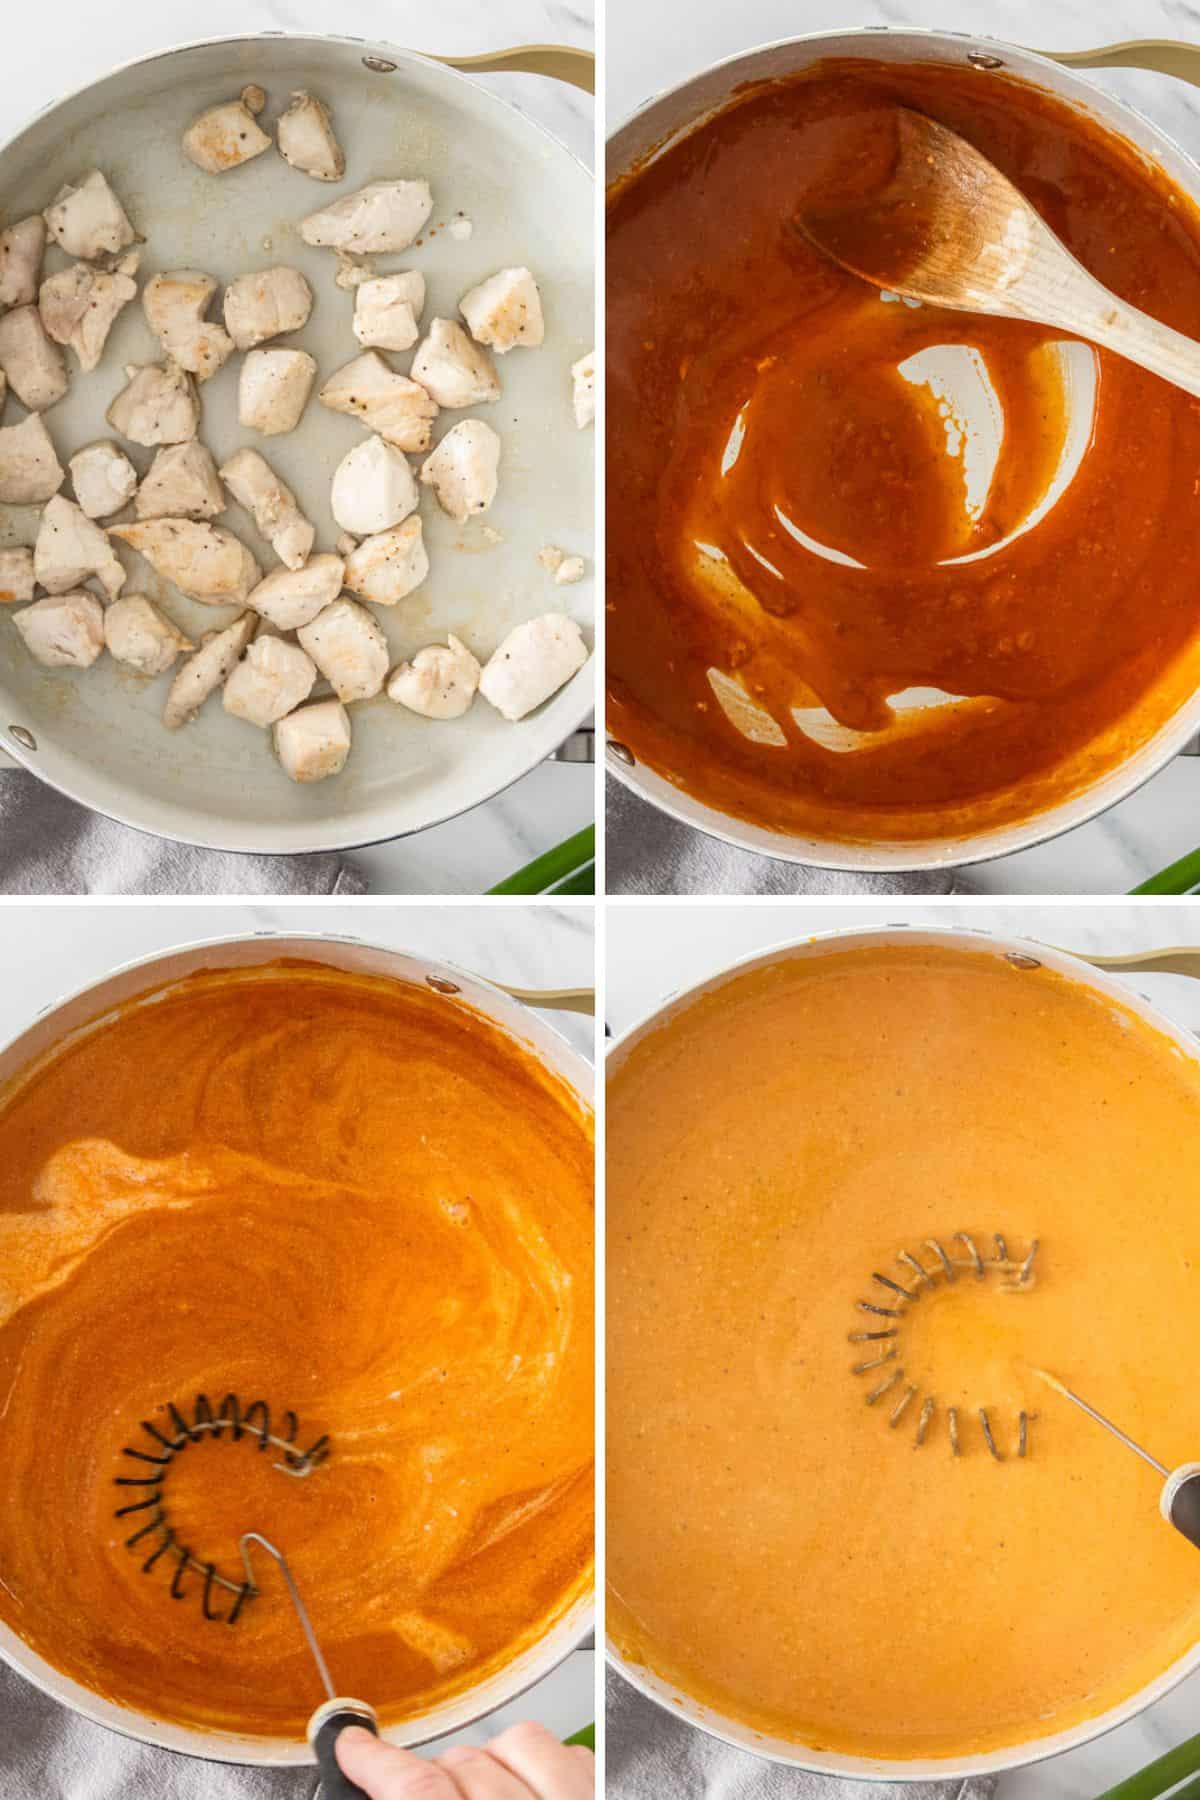 4 photos showing the process of cooking chicken and a sauce in a white skillet.